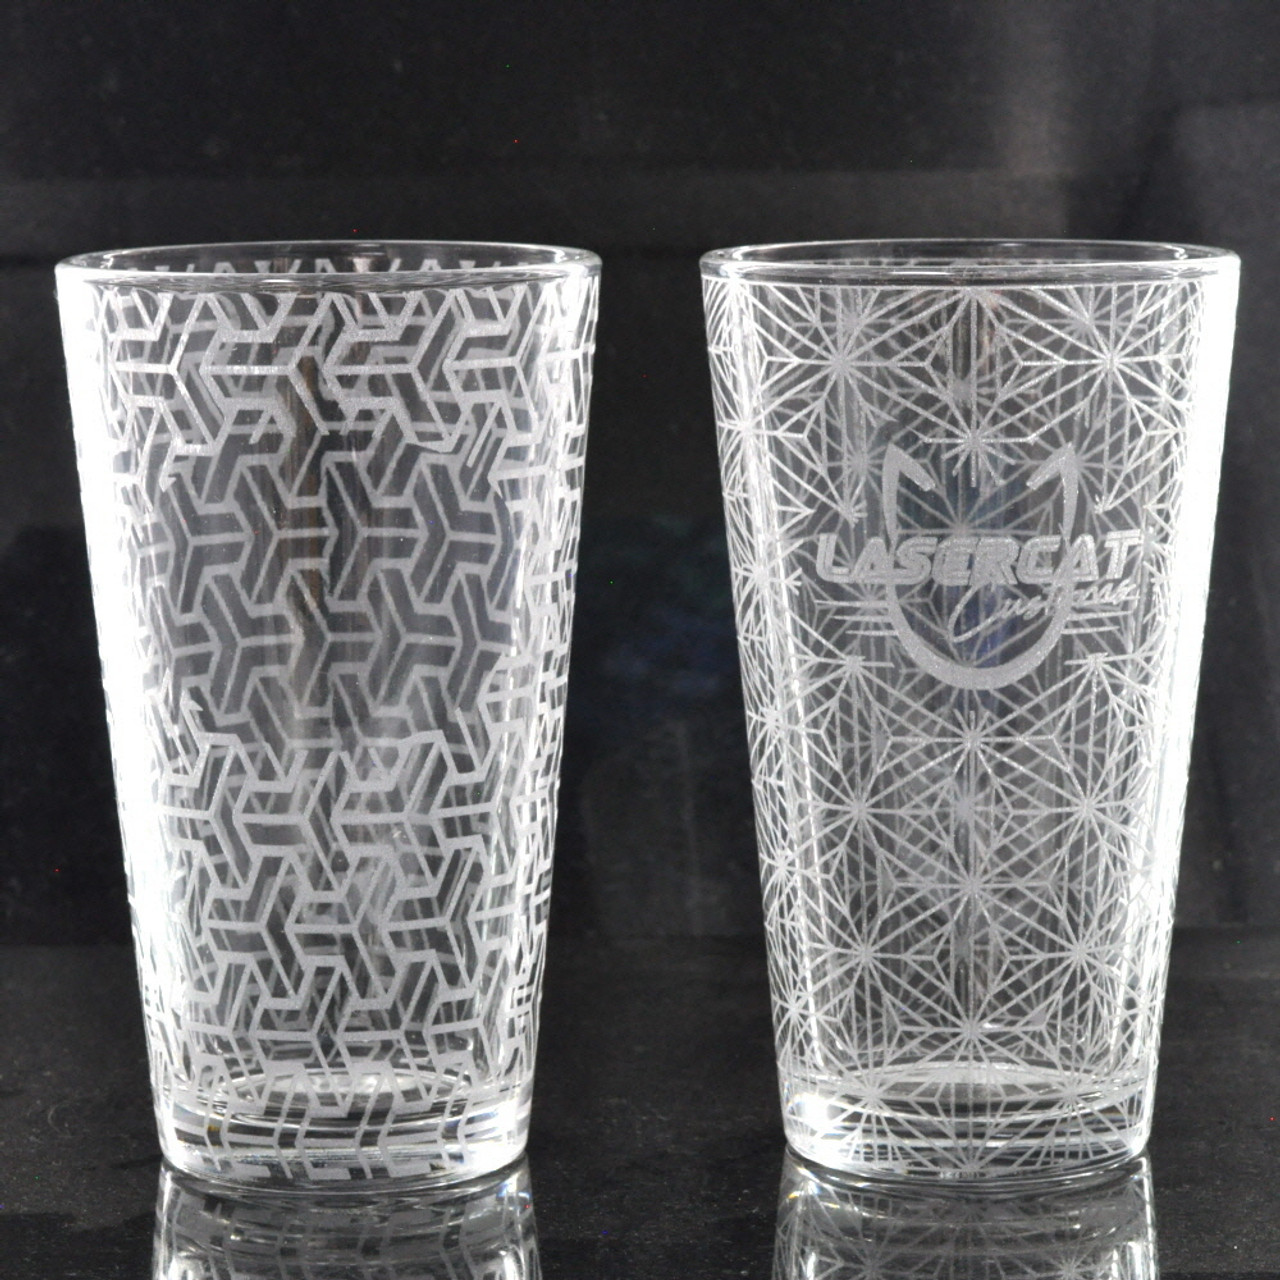 https://cdn11.bigcommerce.com/s-271b7/images/stencil/1280x1280/products/18168/68734/bw-glss-libby16-wrap-logo-sacred-geometry-laser-engraved-libbey-1639-16oz-mixing-glass-full-wrap-w__23653.1641263569.jpg?c=2